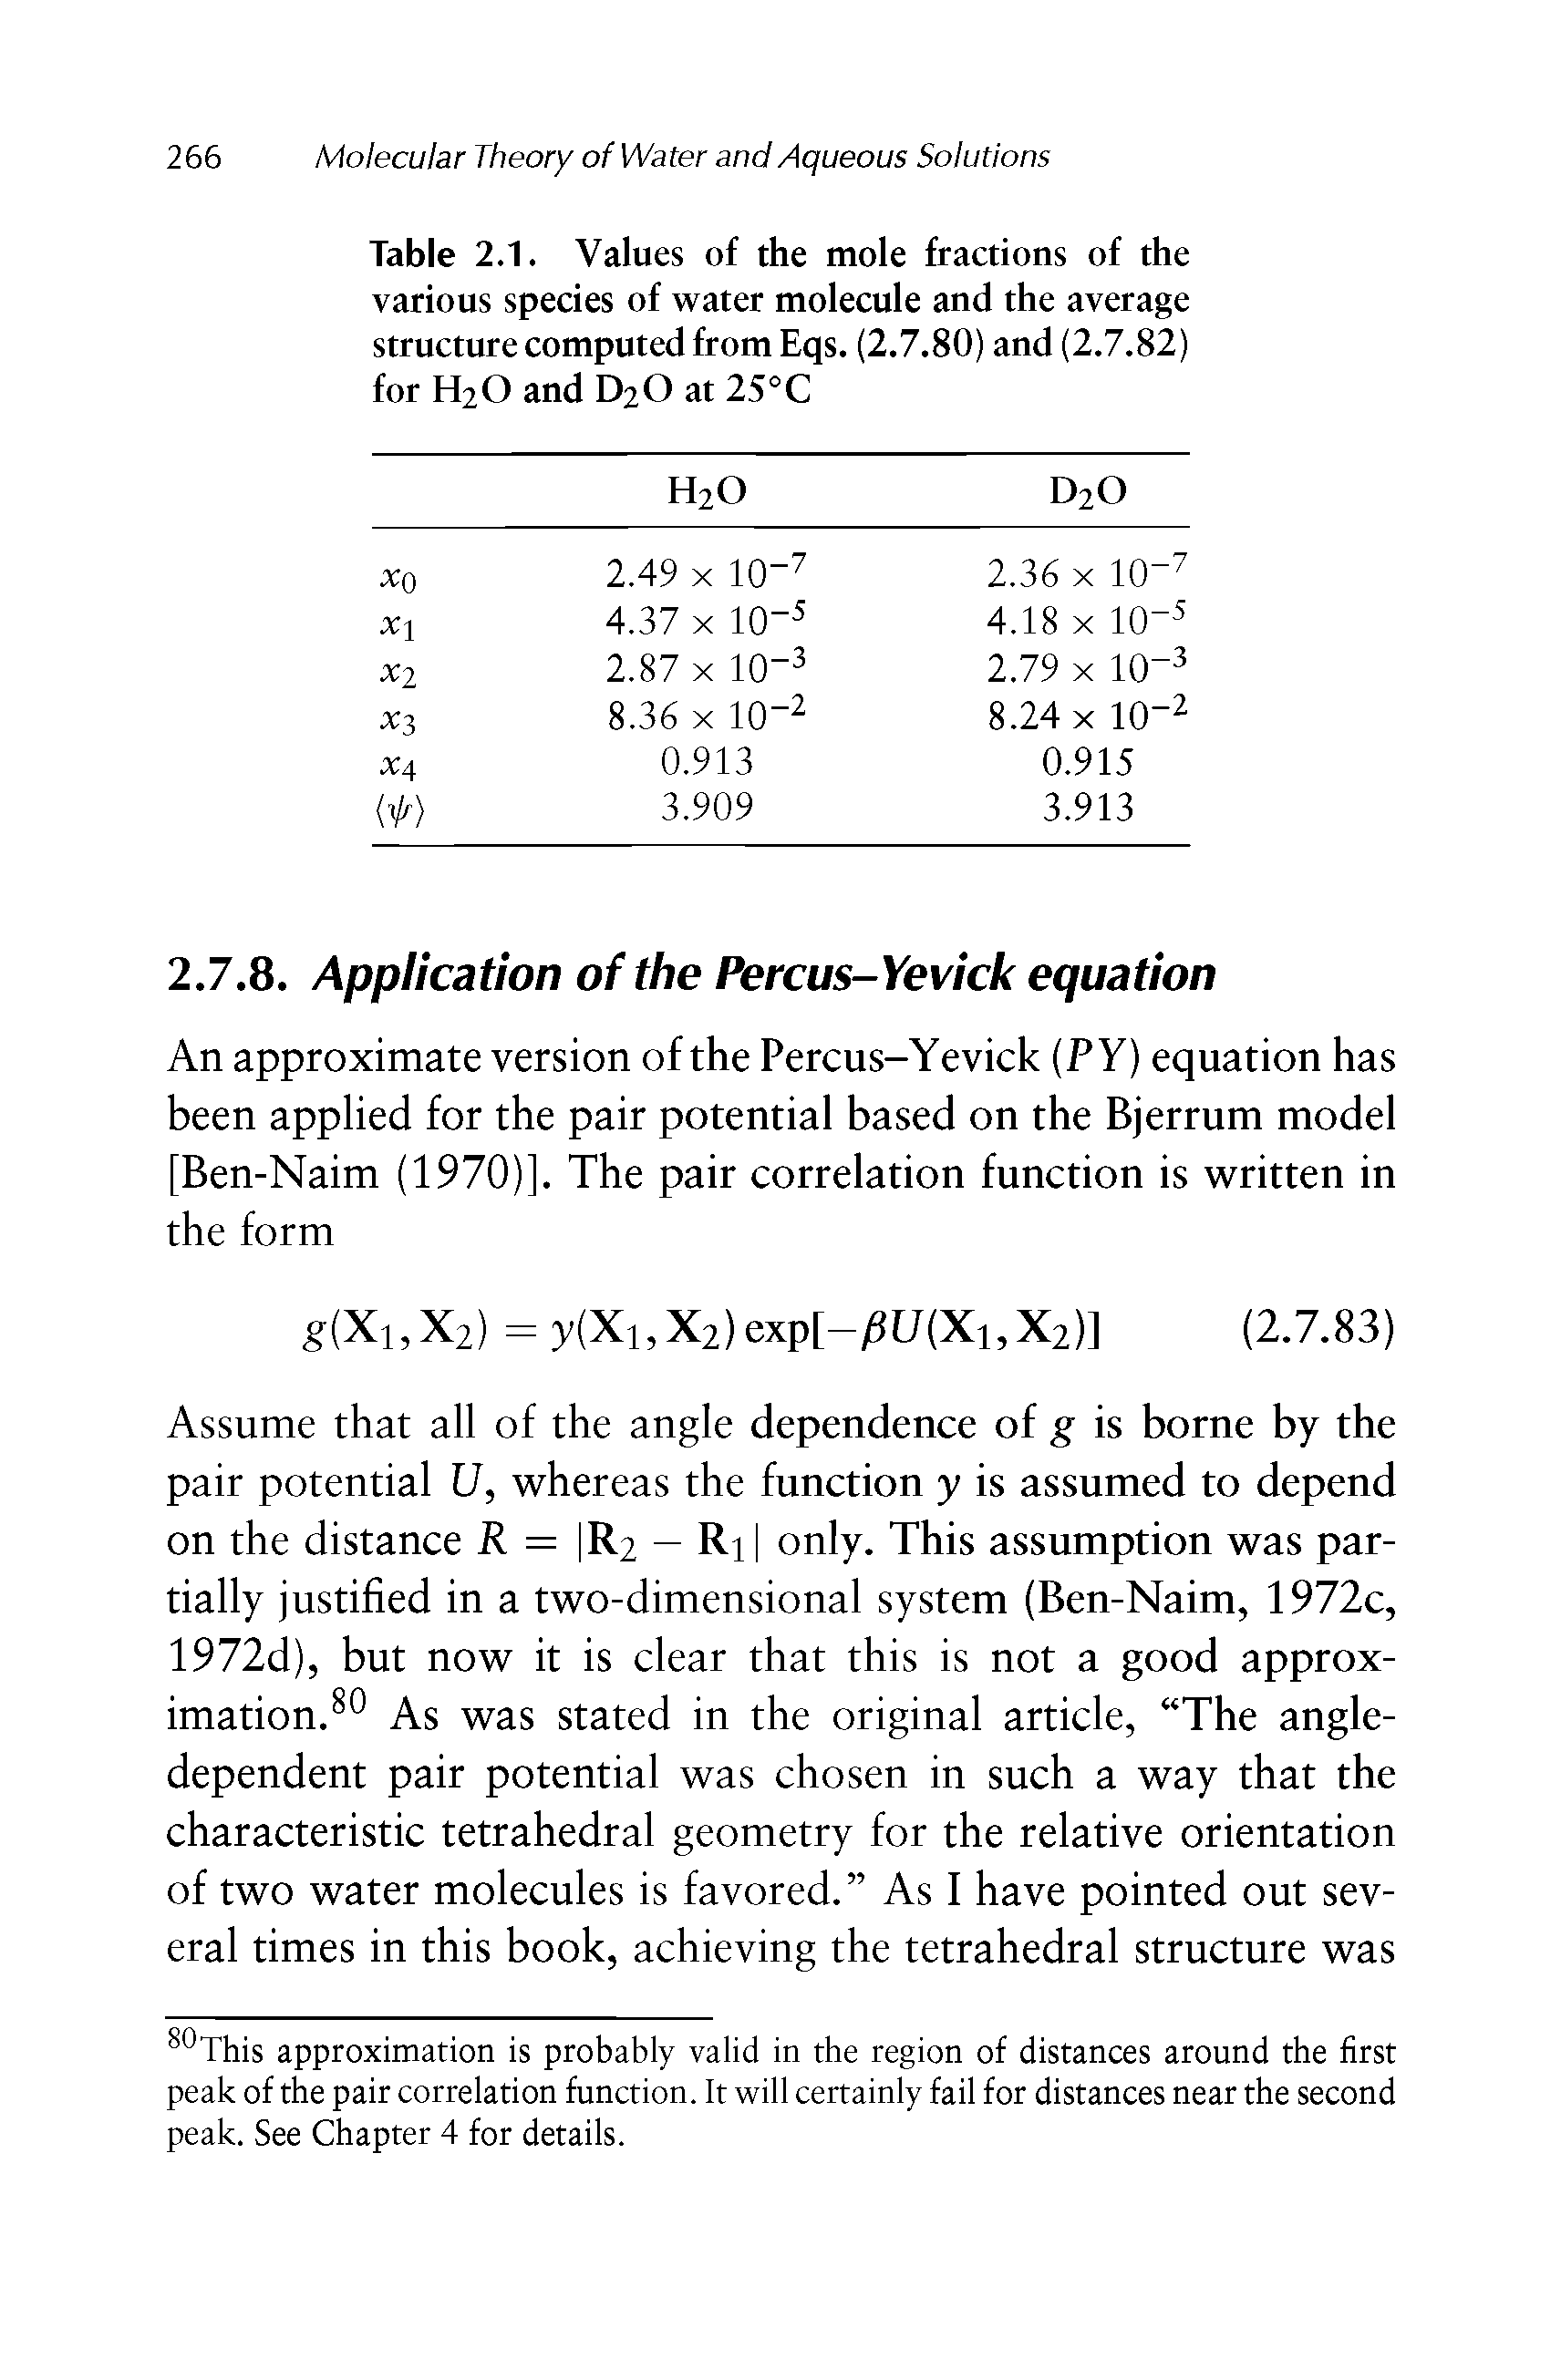 Table 2.1. Values of the mole fractions of the various species of water molecule and the average structure computed from Eqs. (2.7.80) and (2.7.82) for H2O and D2O at 25 C...